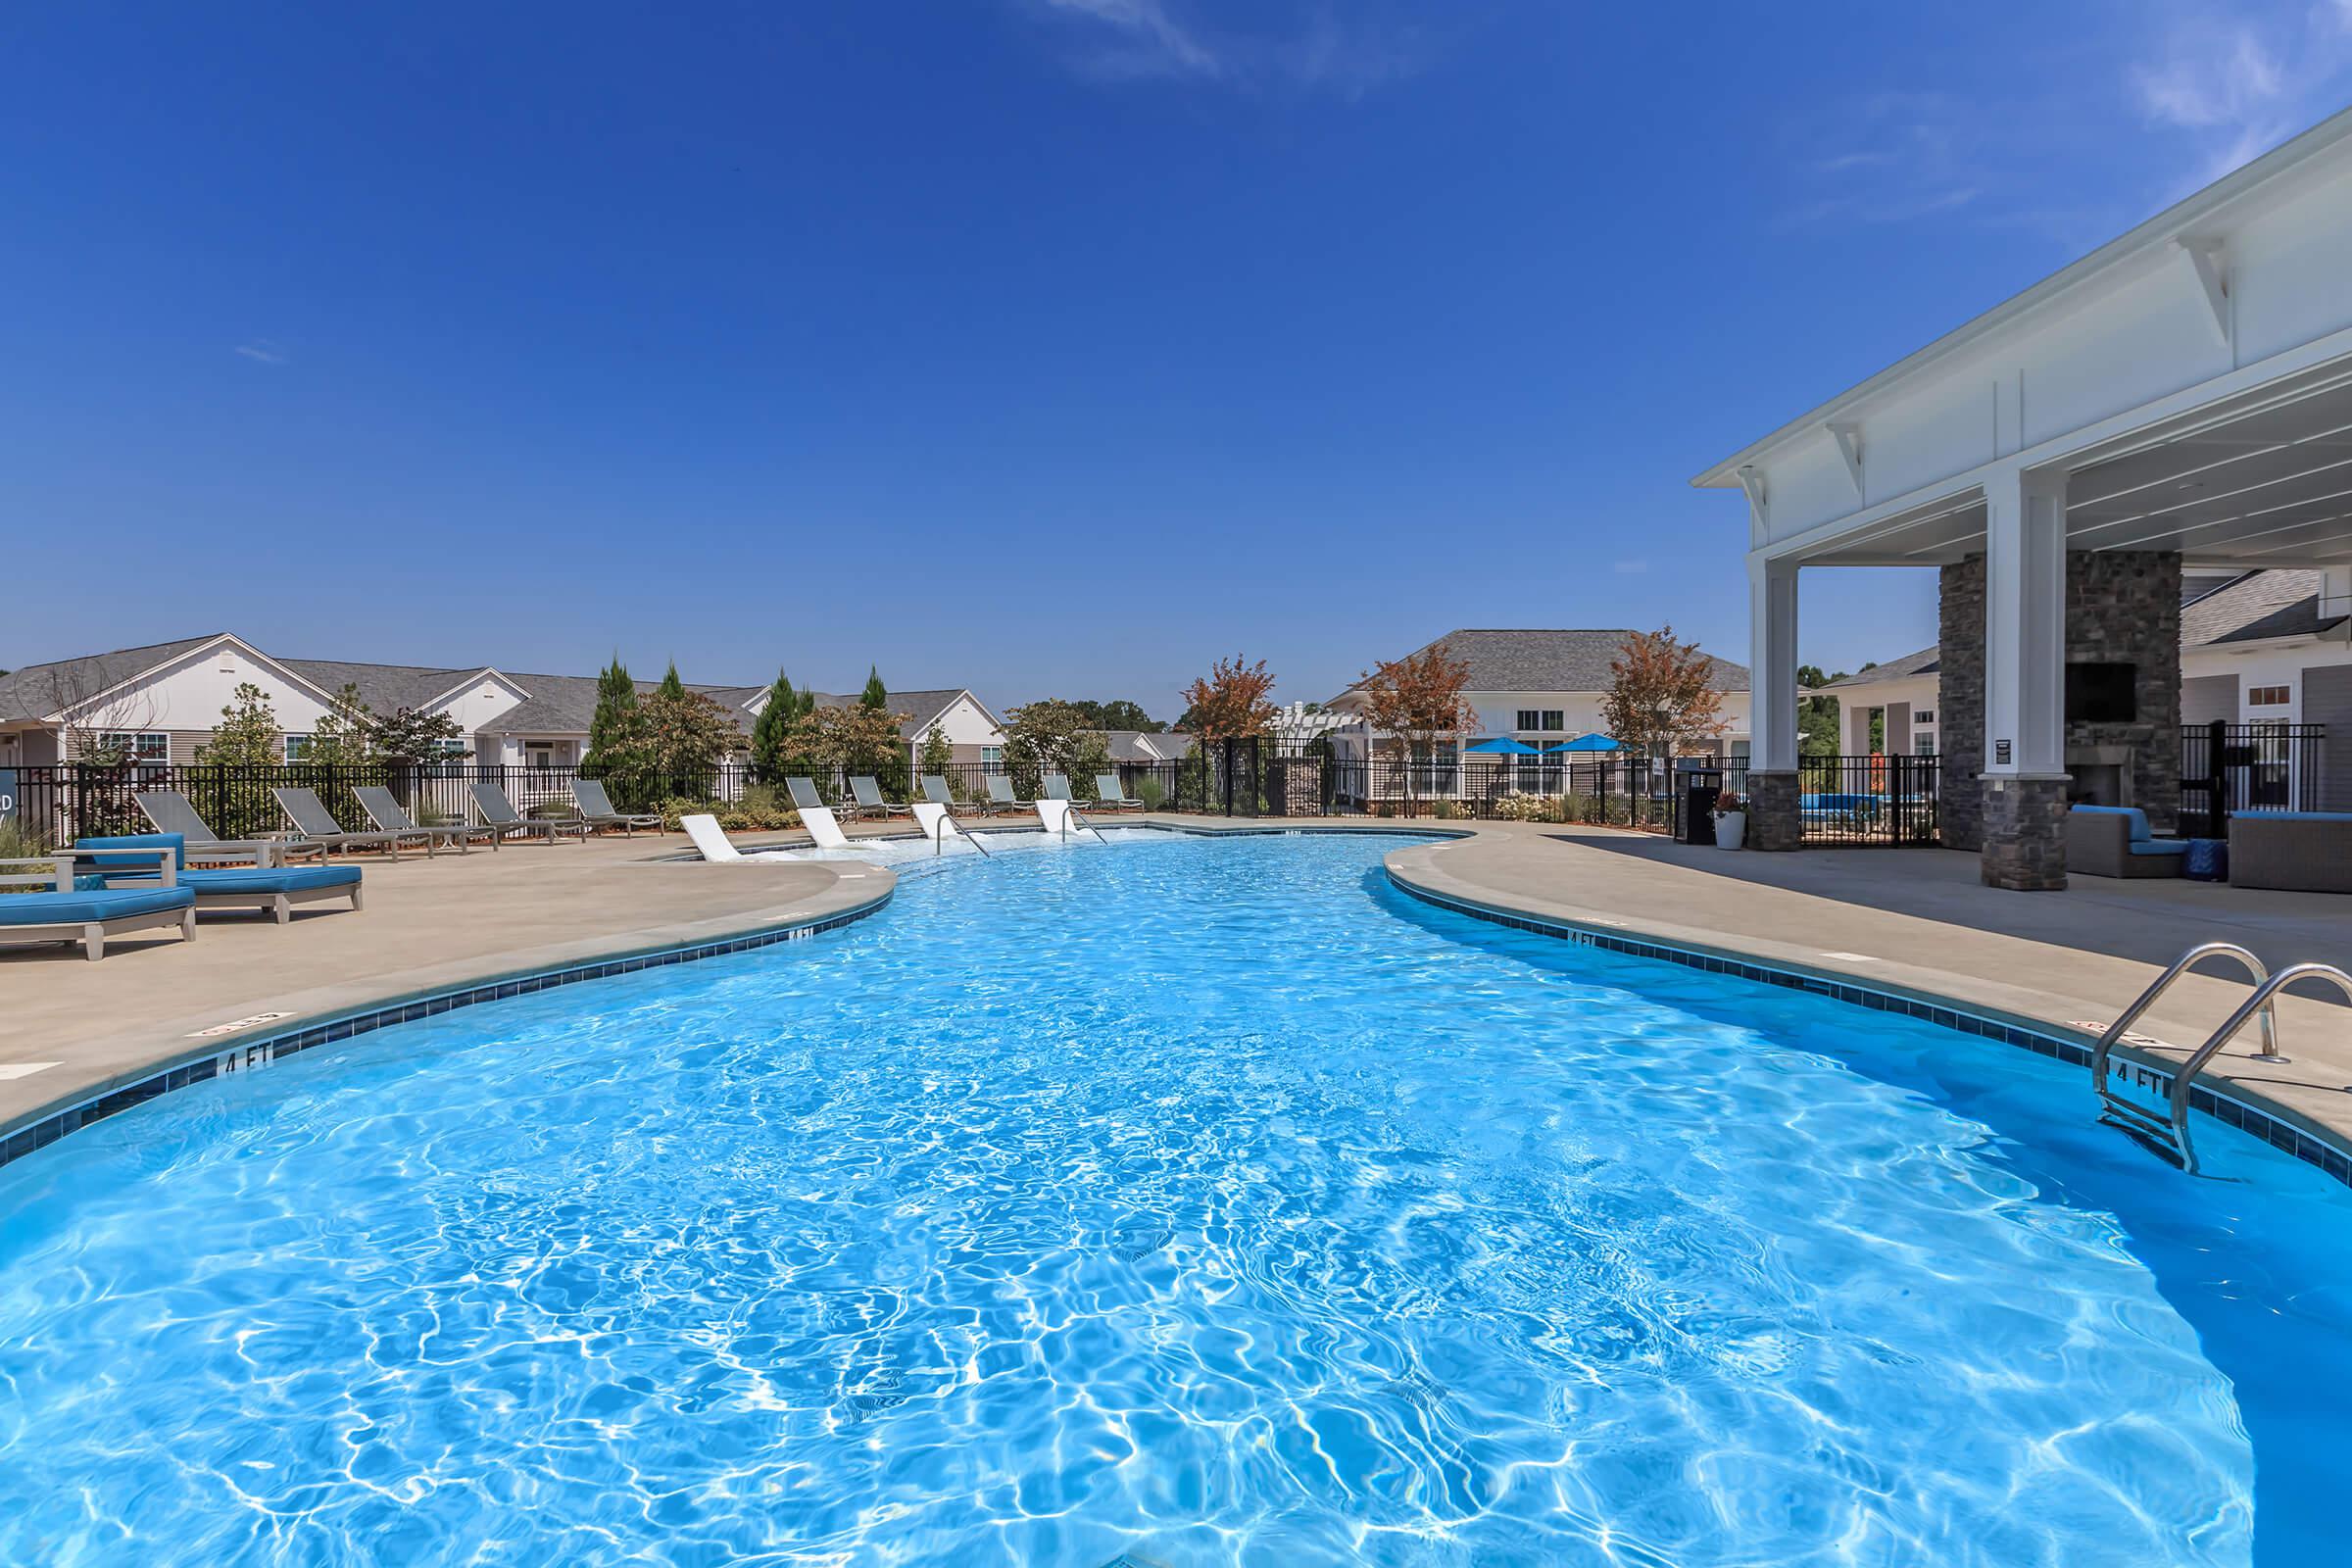 Dive Into A Shimmering Swimming Pool At Riverstone Apartments At Long Shoals In Arden, North Carolina